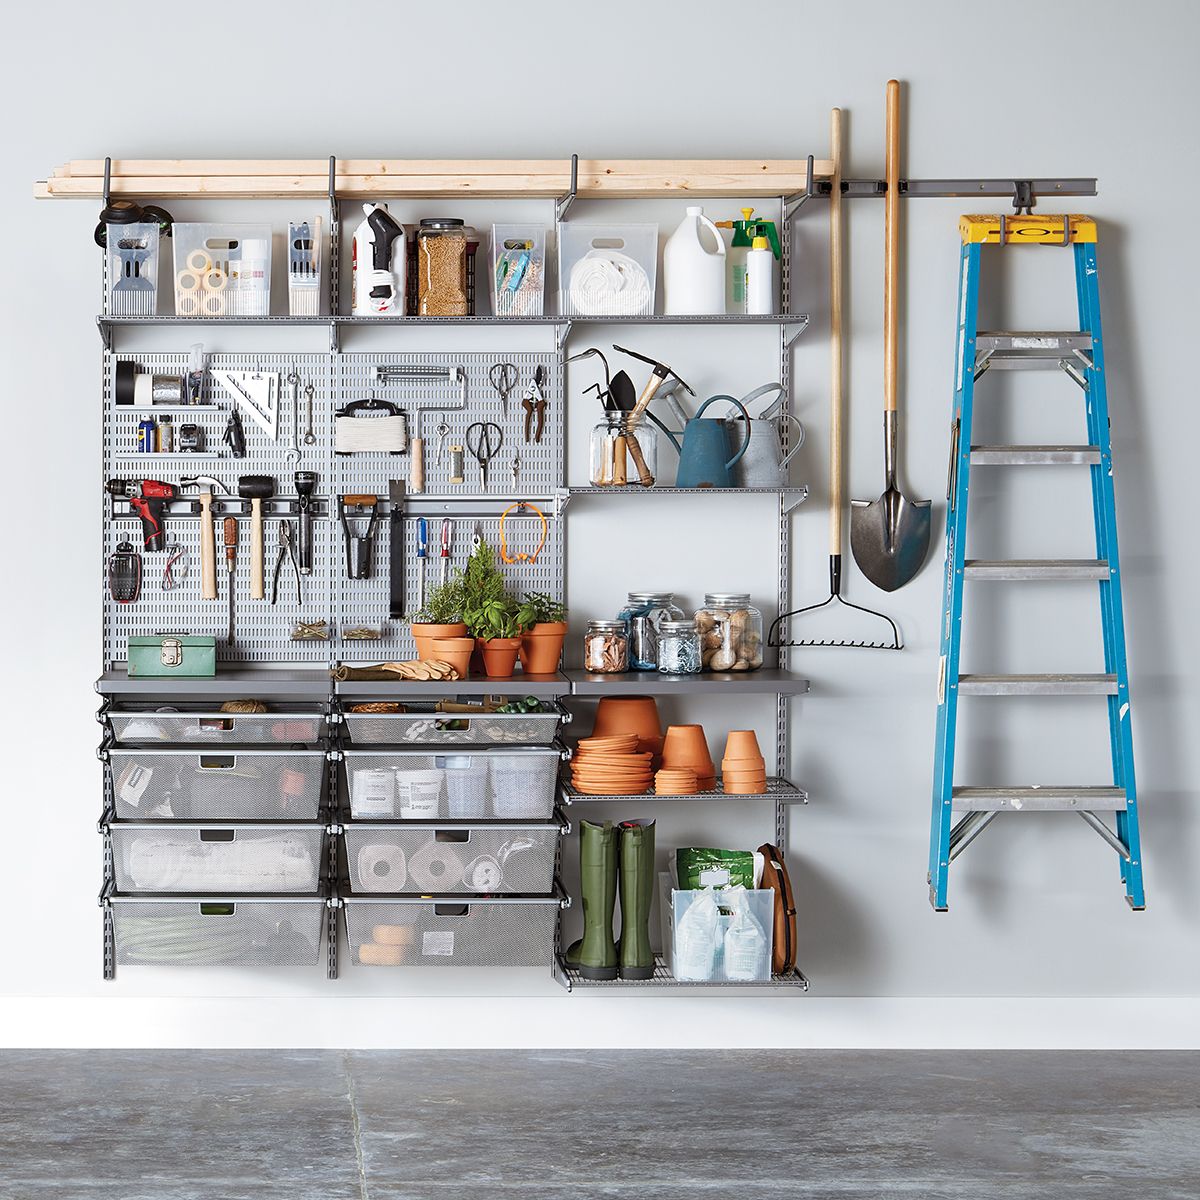 The Best Garage Storage Ideas How To, How To Organise Garage Shelves